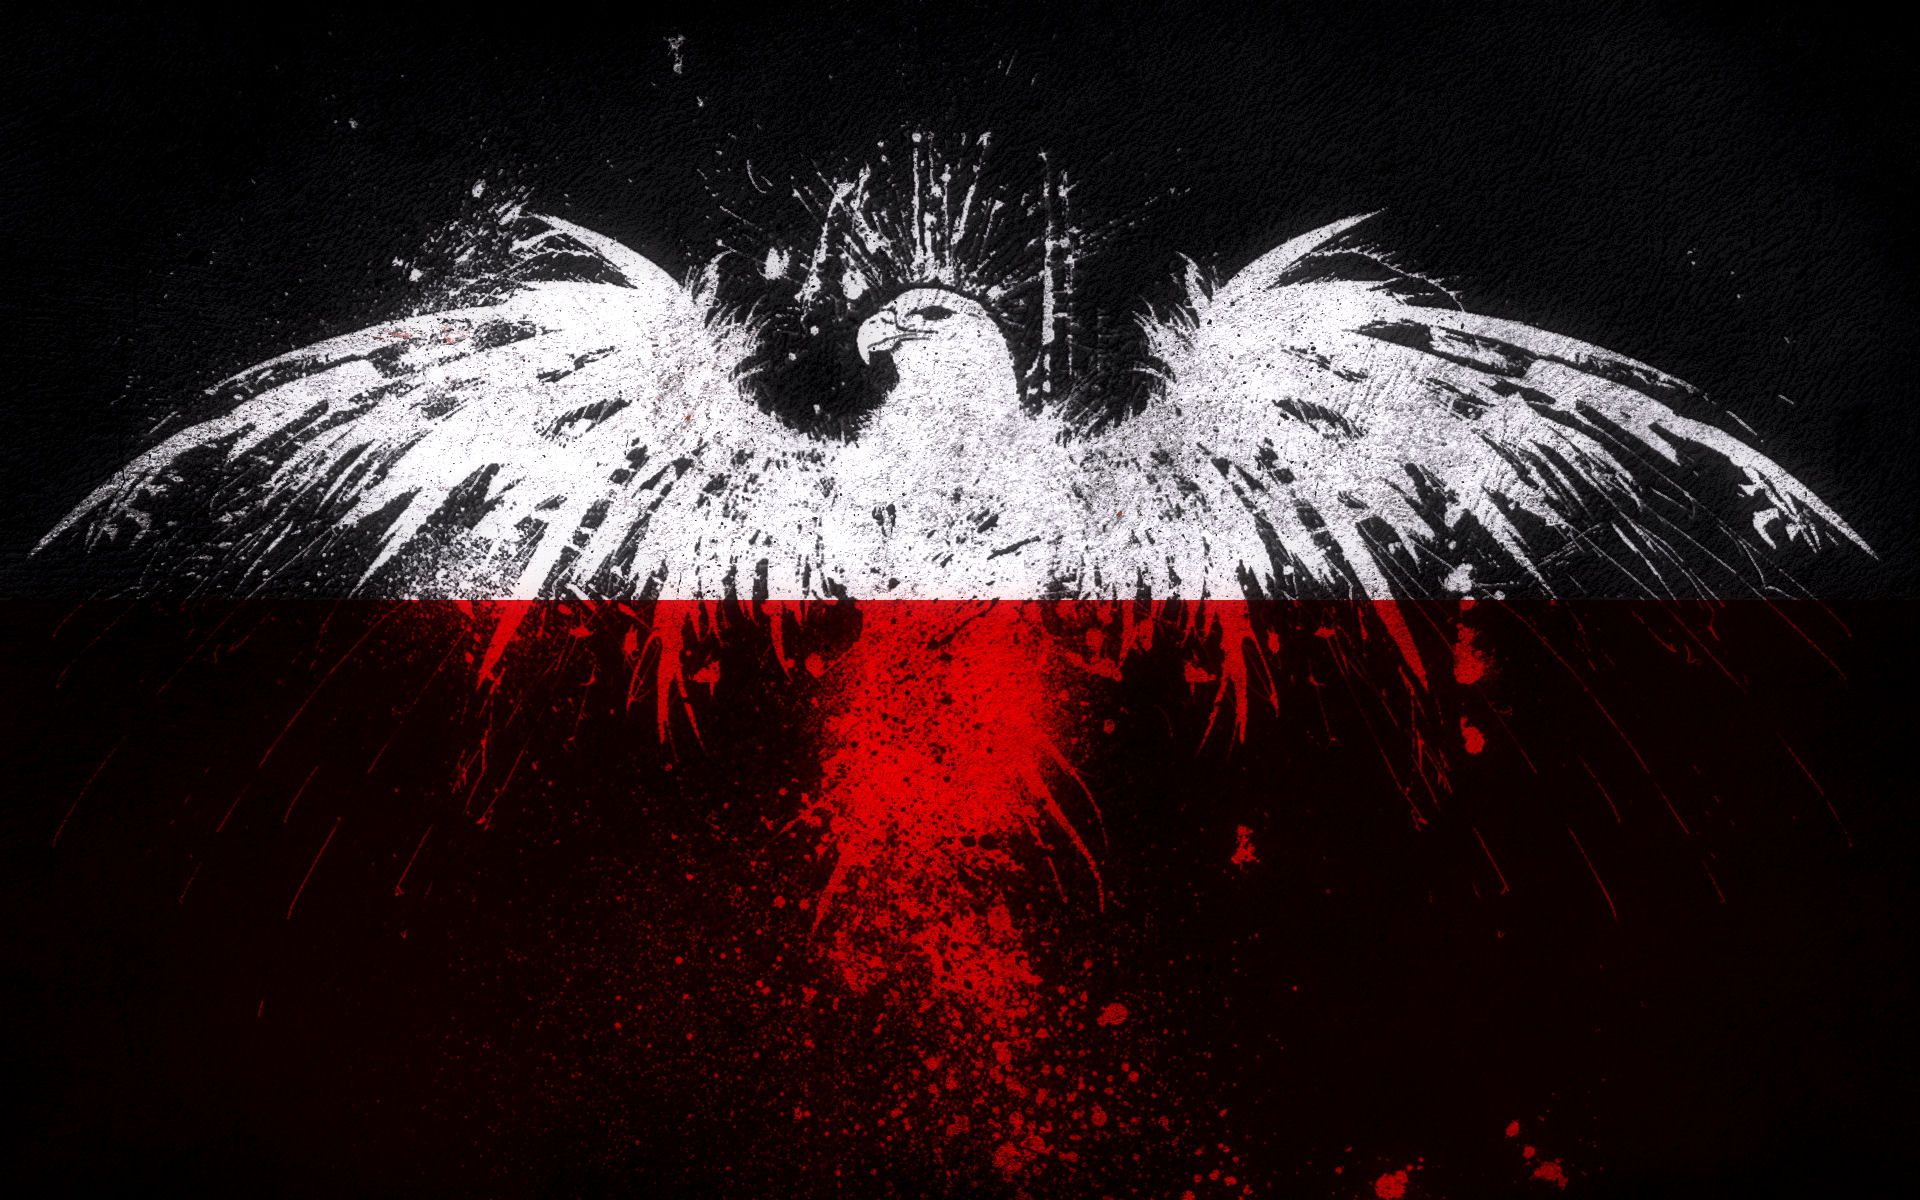 Wallpaper bird, eagle, flag, America, USA for mobile and desktop, section  разное, resolution 2560x1920 - download